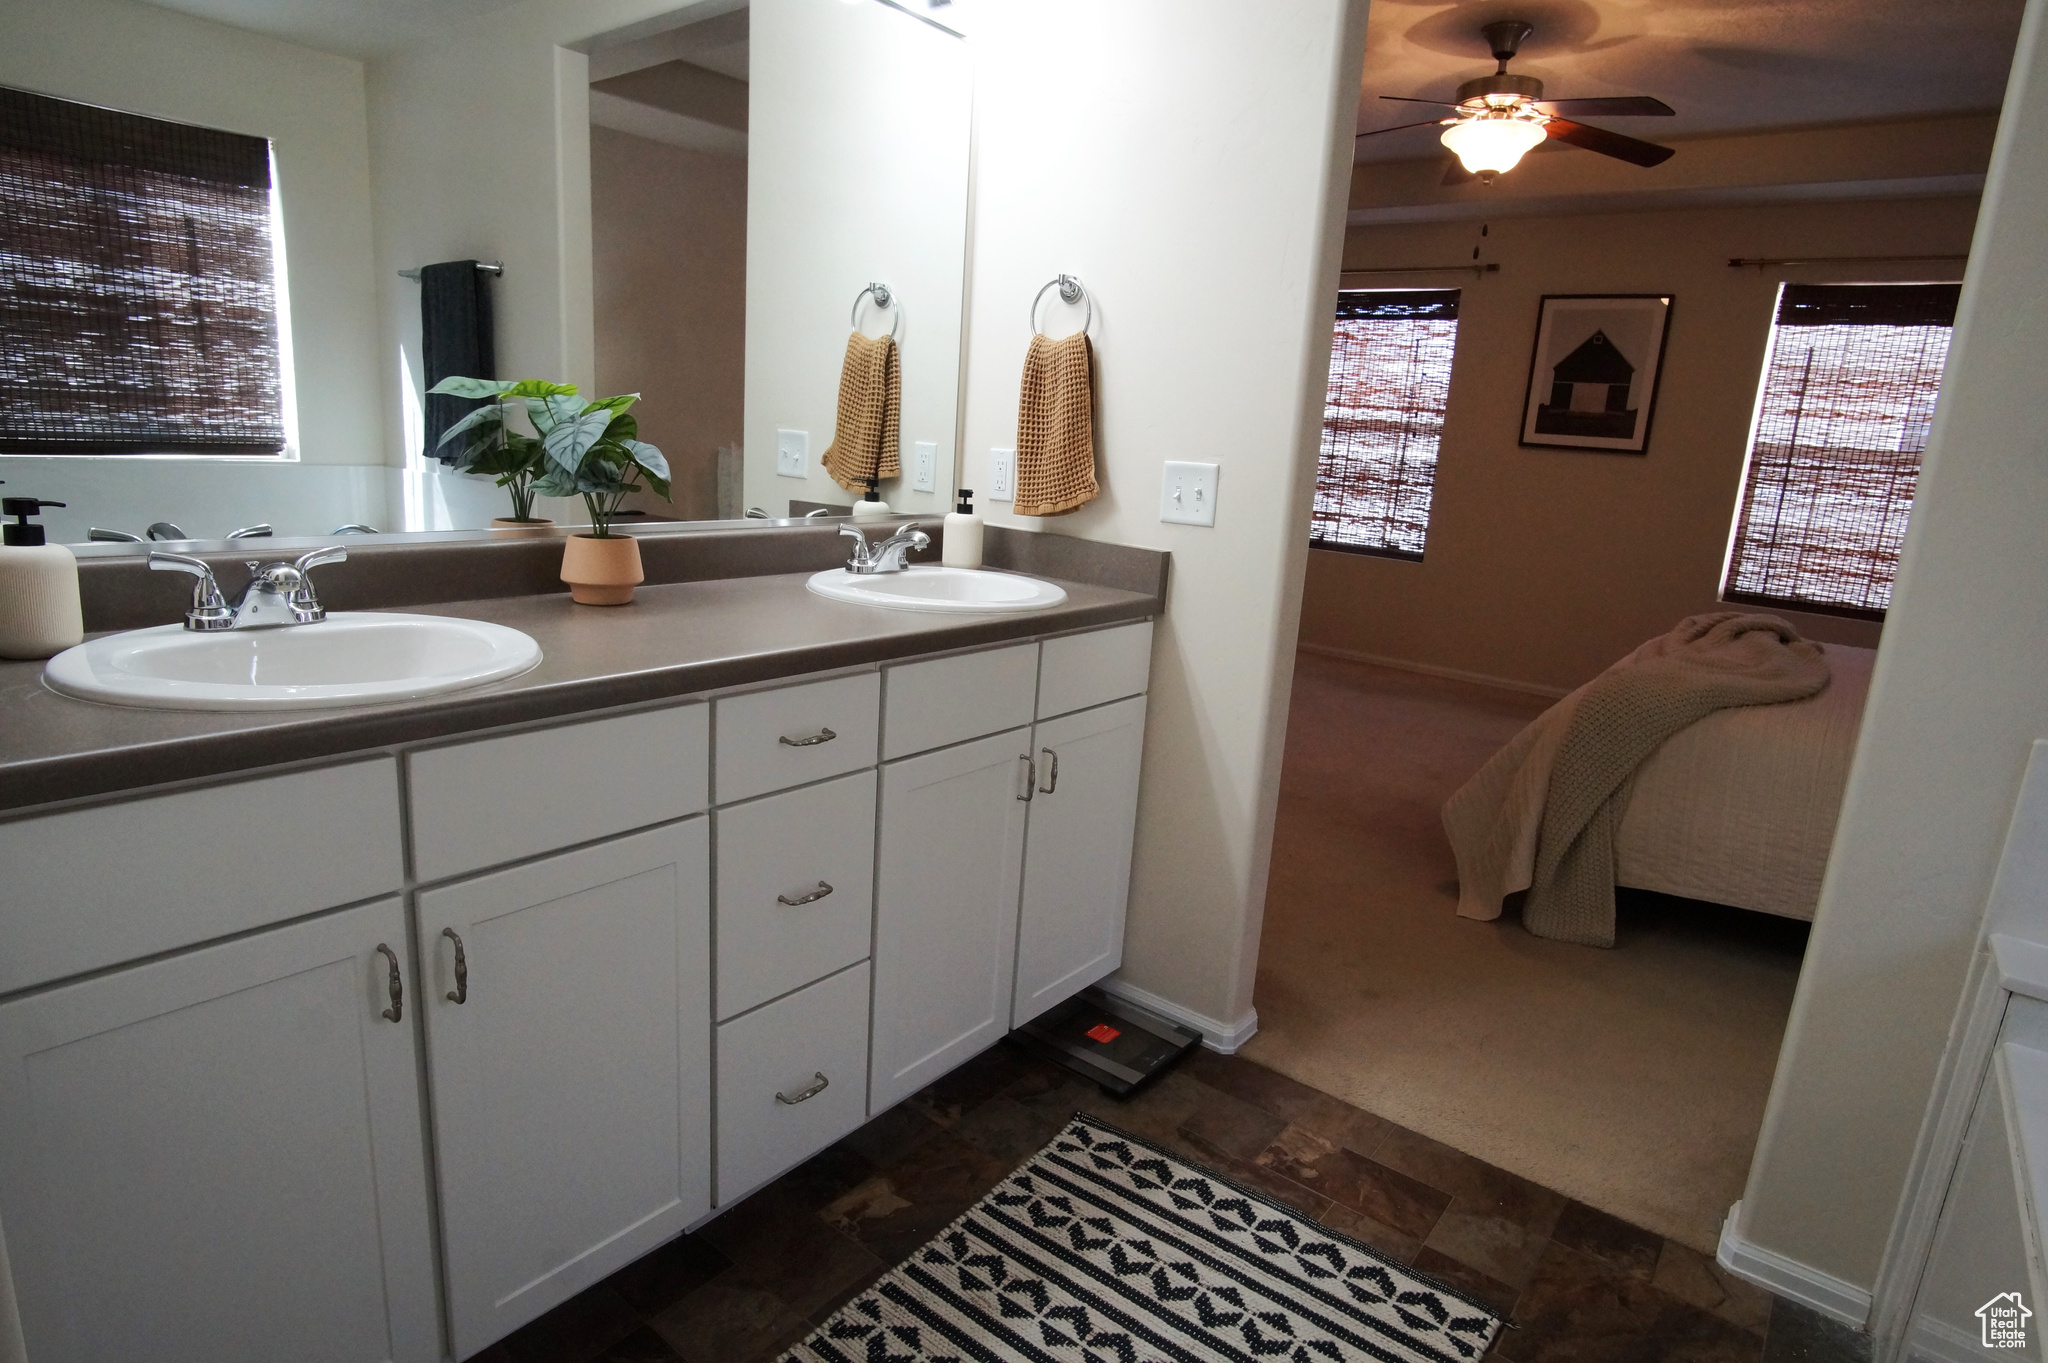 Primary Bedroom EnSuite with Walkin Closet, Double sinks, and Garden tub